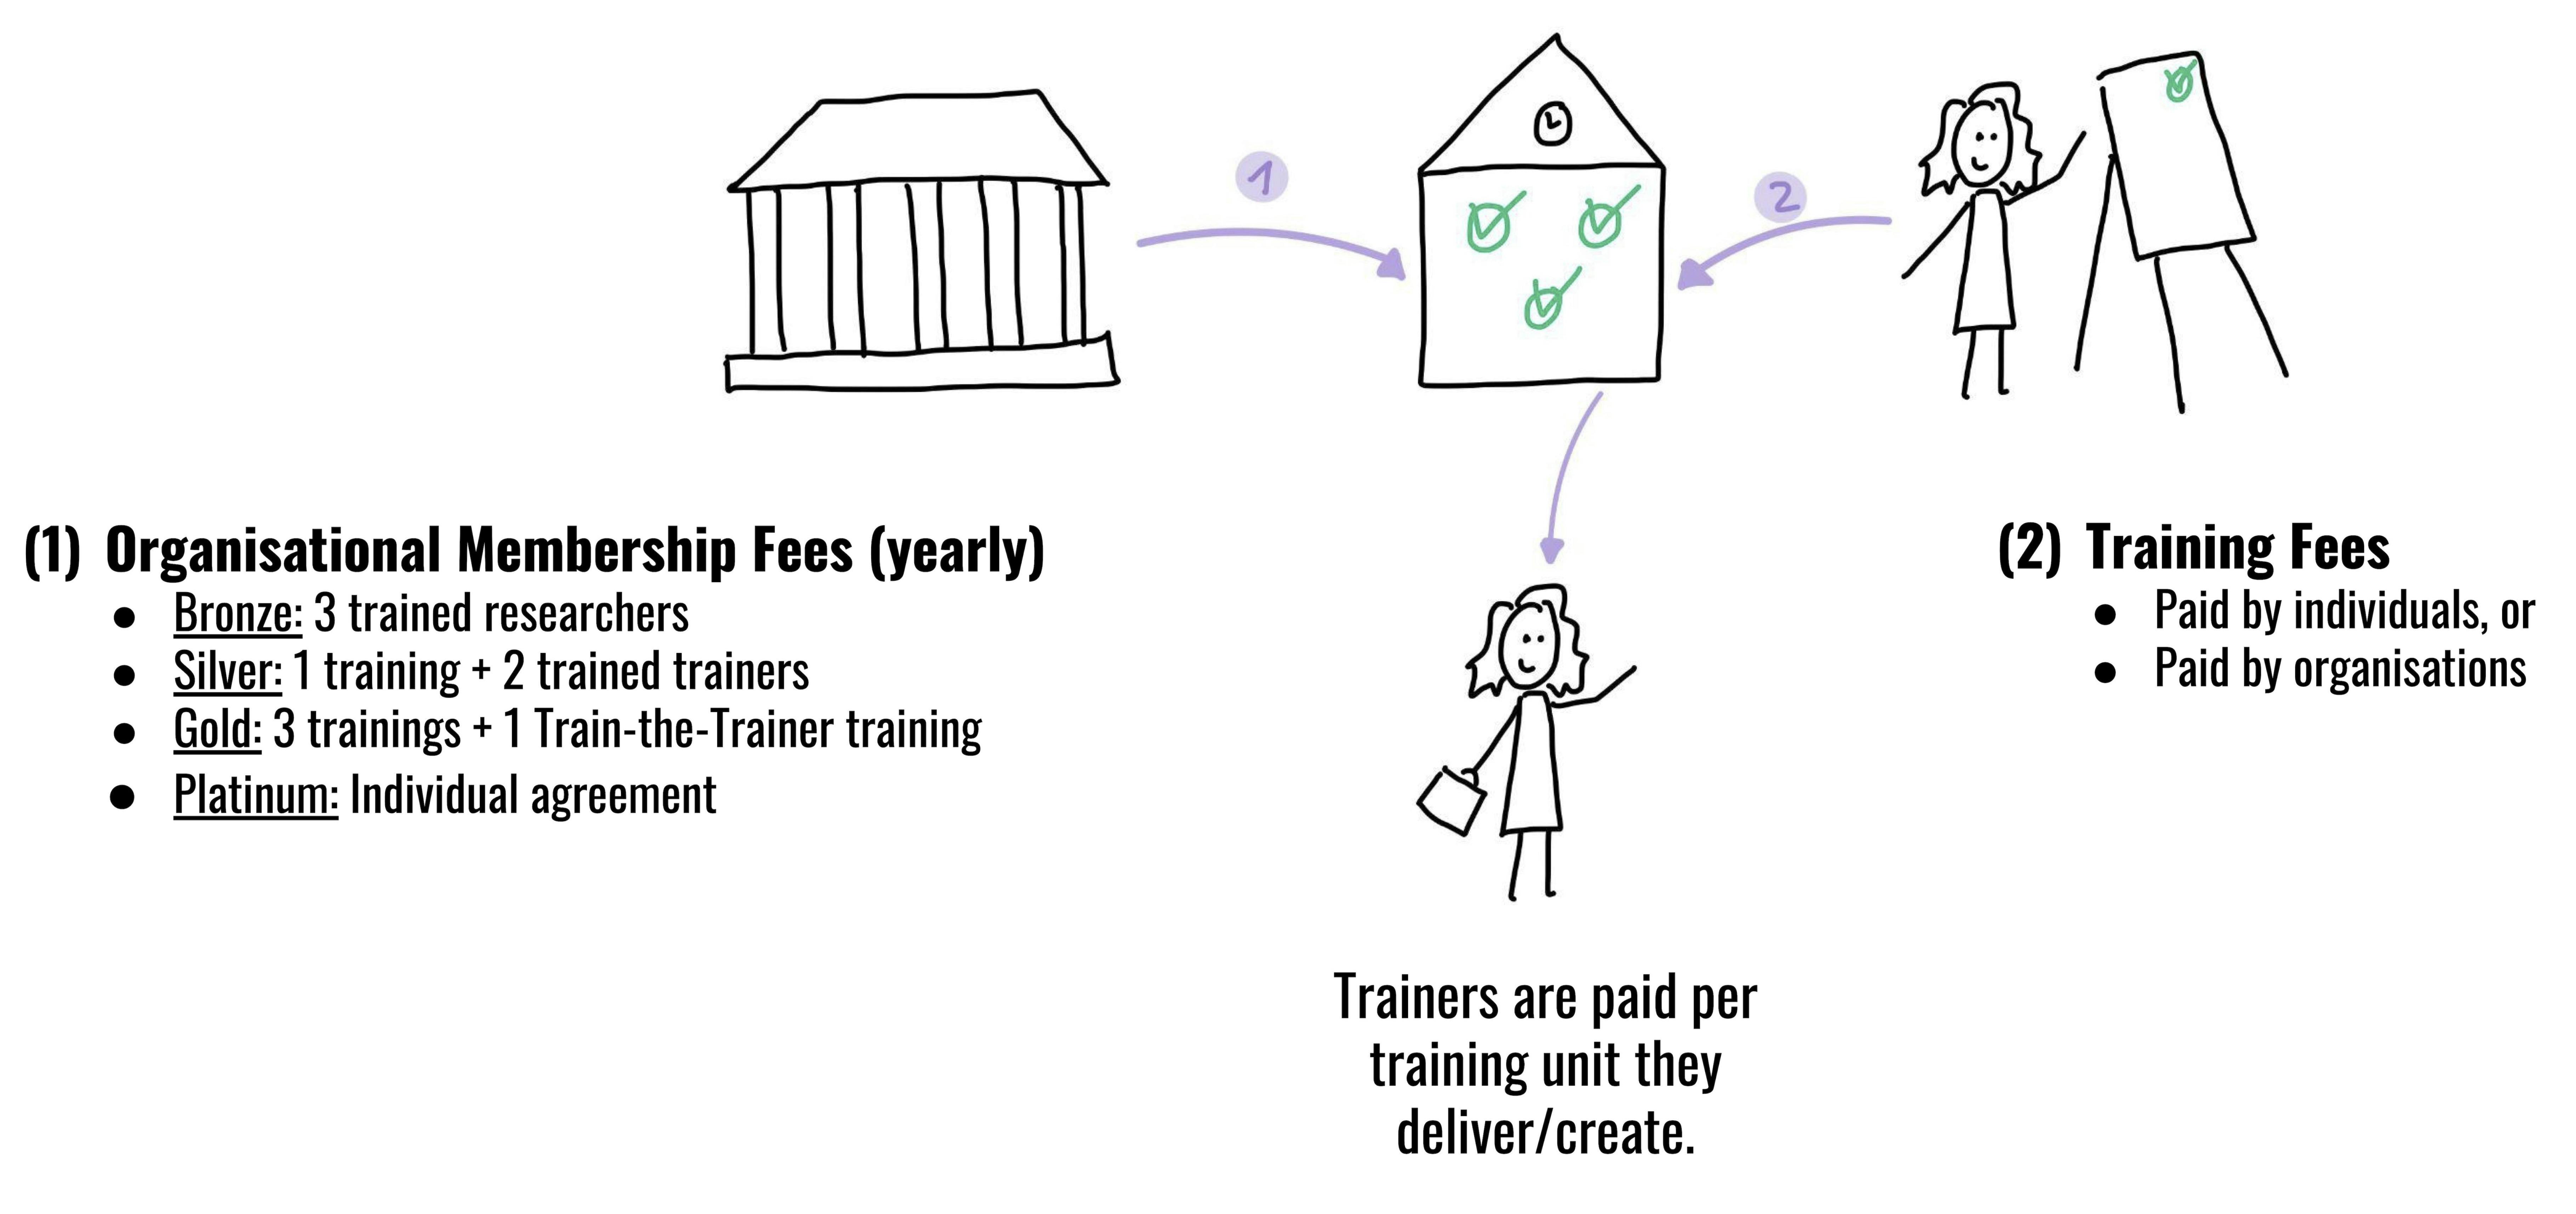 Funding model: trainers are paid per training unit they provide